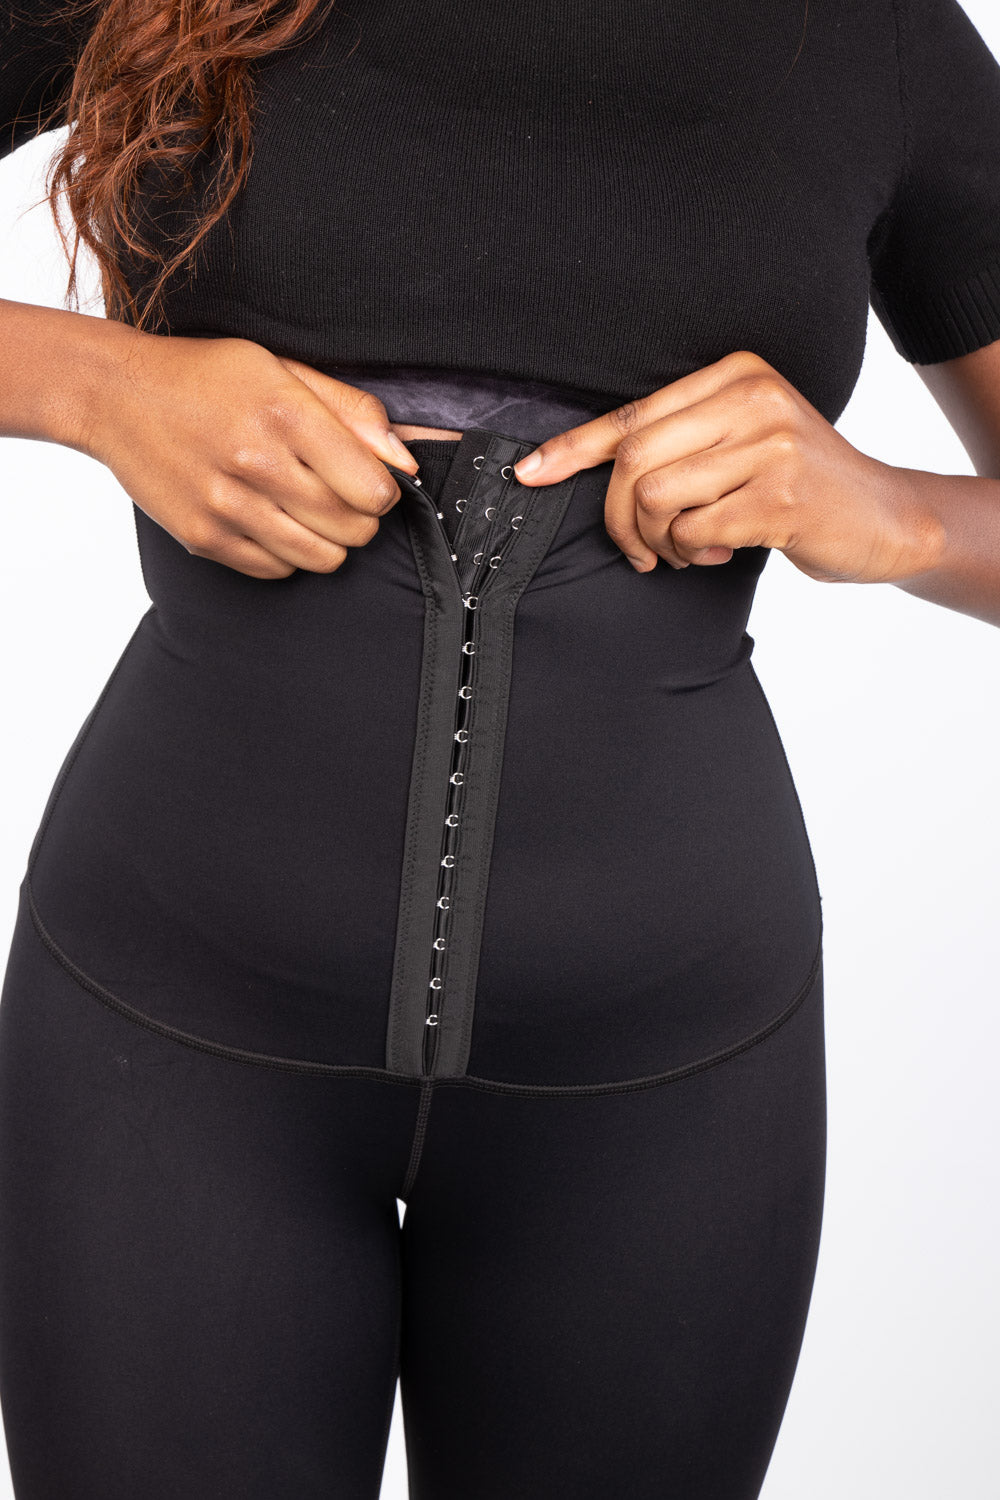 High Waist Body Shaping Leggings with Build-in Corset, Tummy